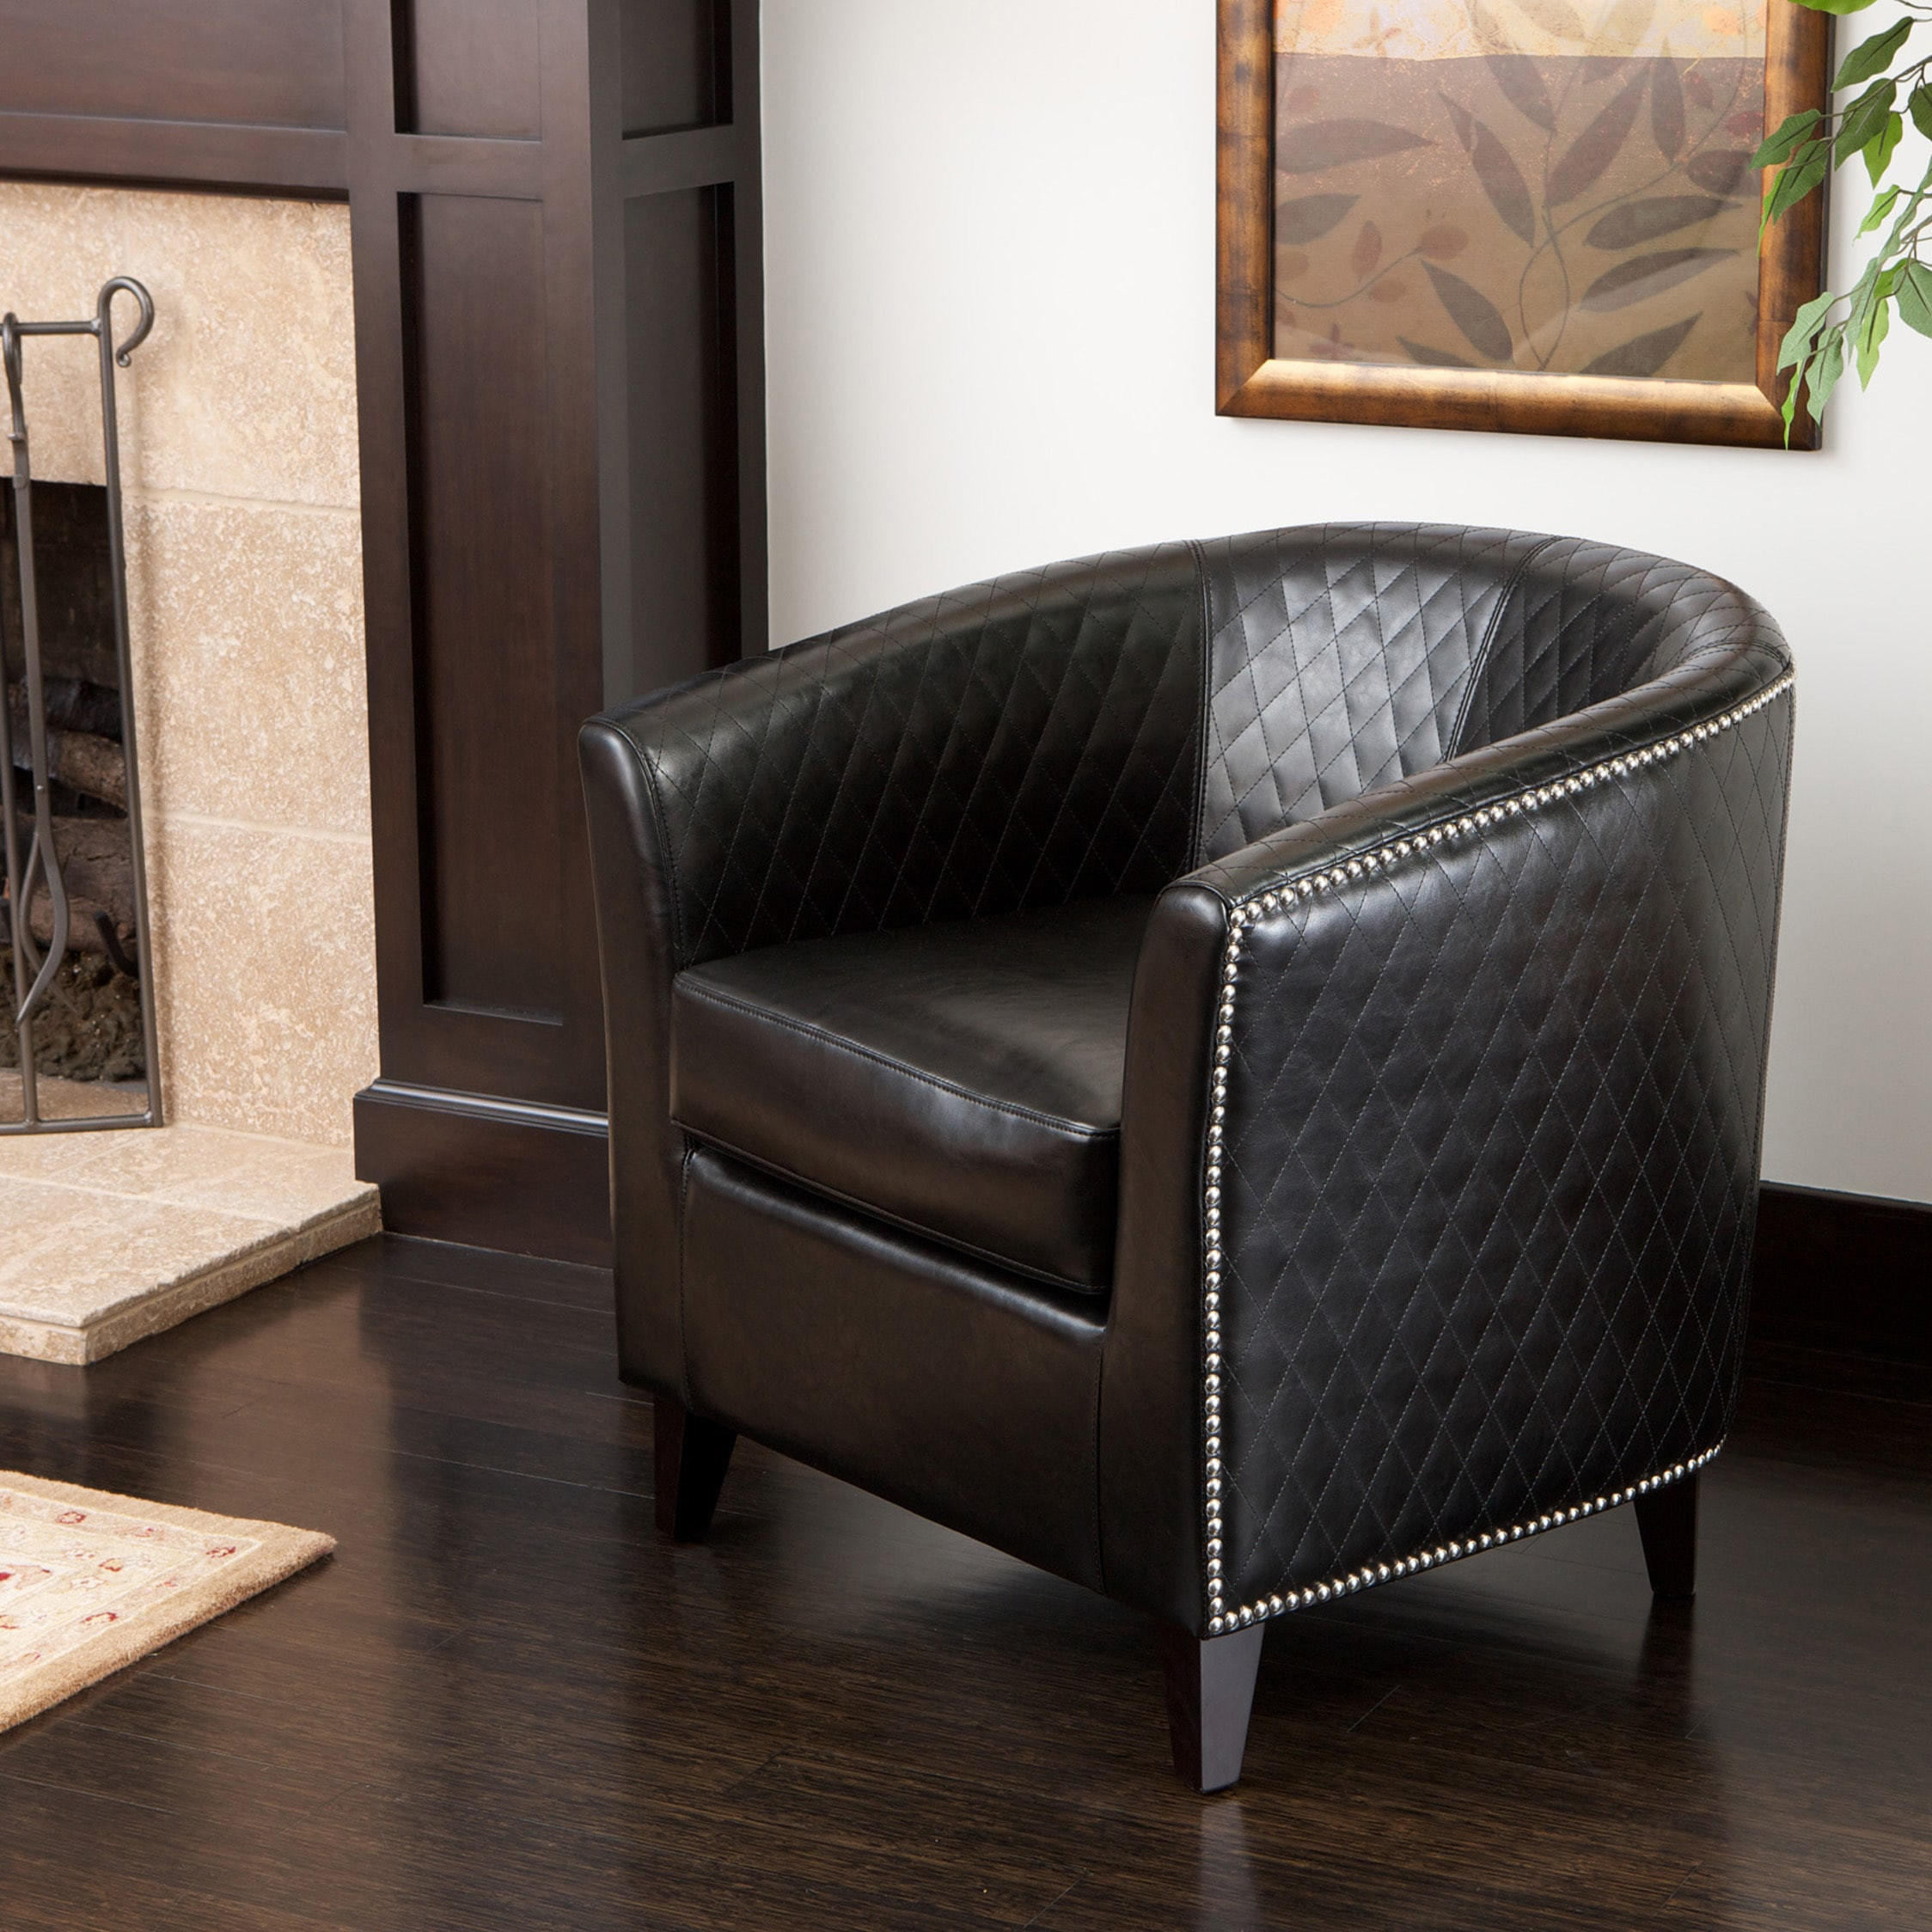 Overstock Living Room Chairs
 Christopher Knight Home Mia Black Bonded Leather Quilted